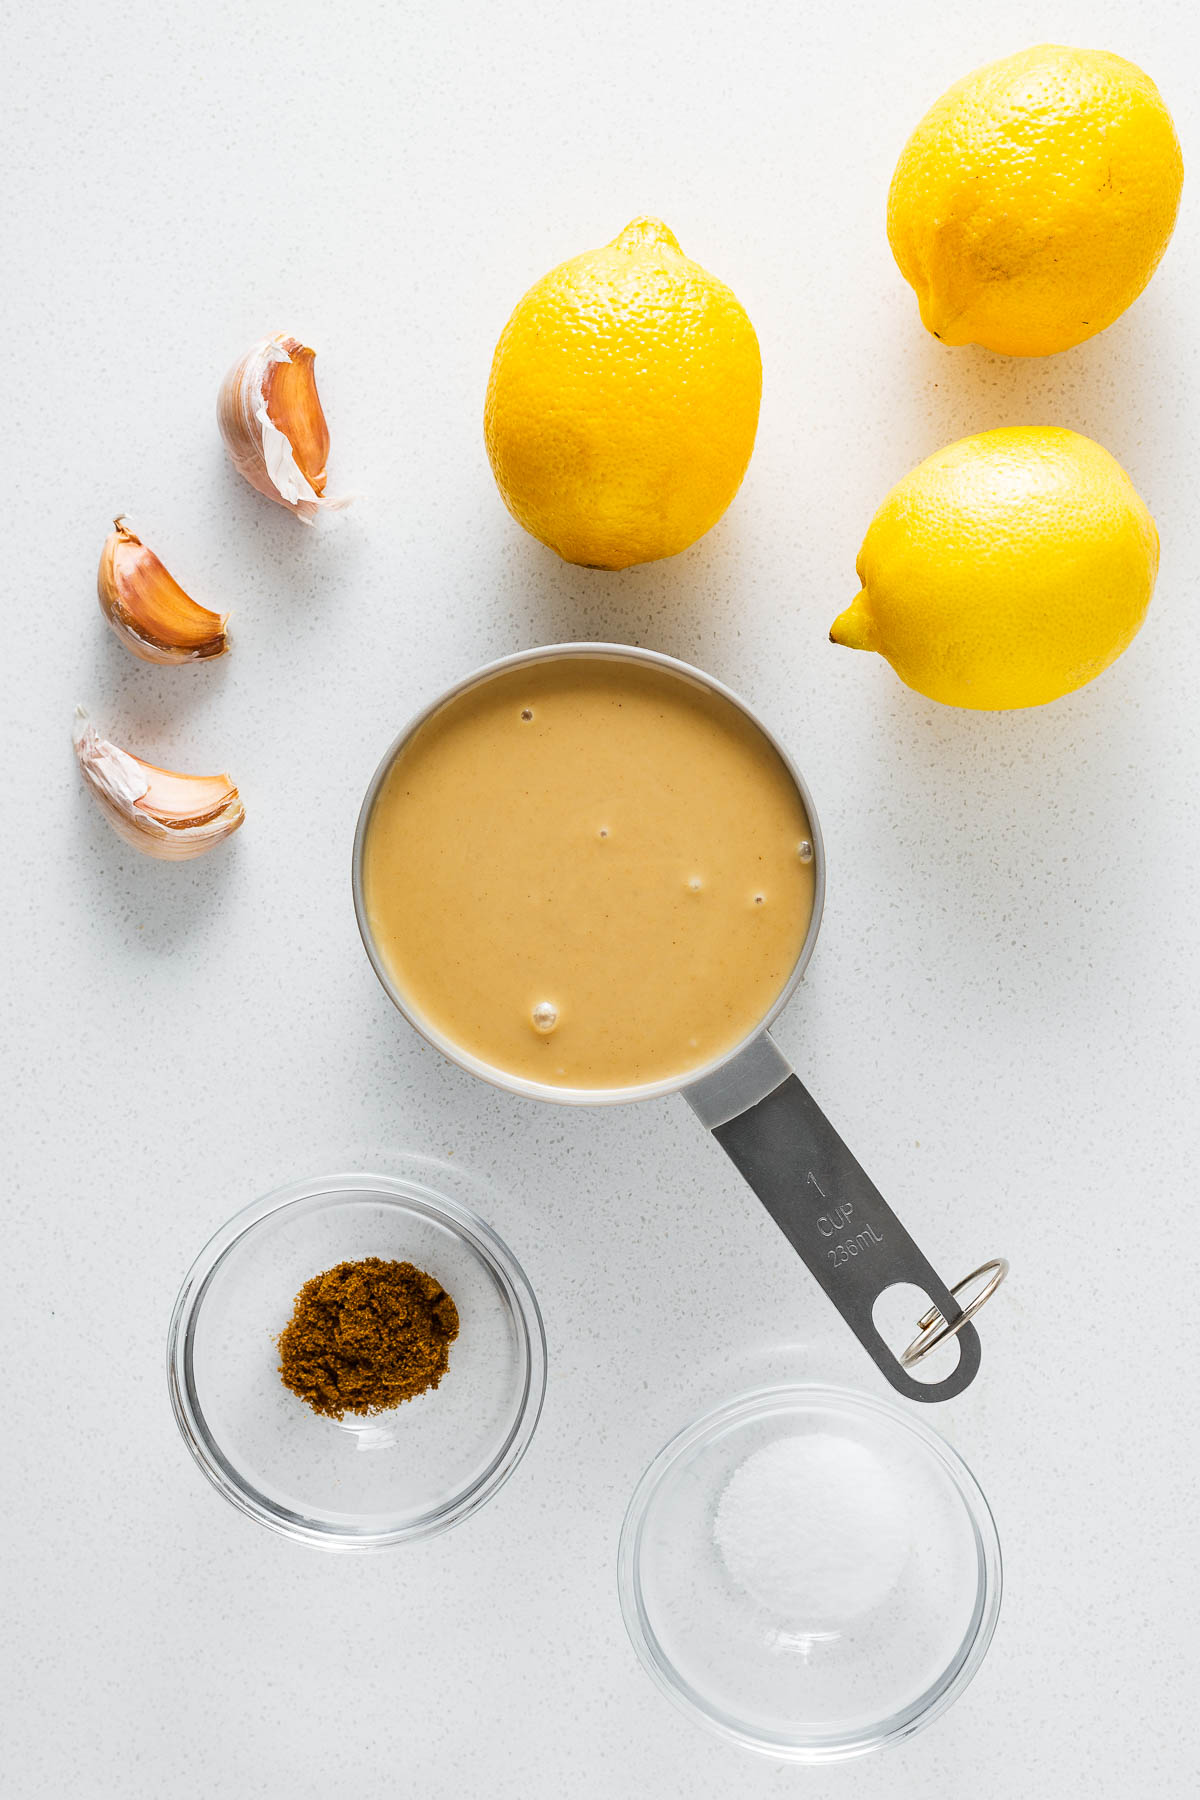 The simple ingredients for easy lemon tahini sauce viewed from above. This includes fresh lemons, tahini, garlic cloves, ground cumin and kosher salt.